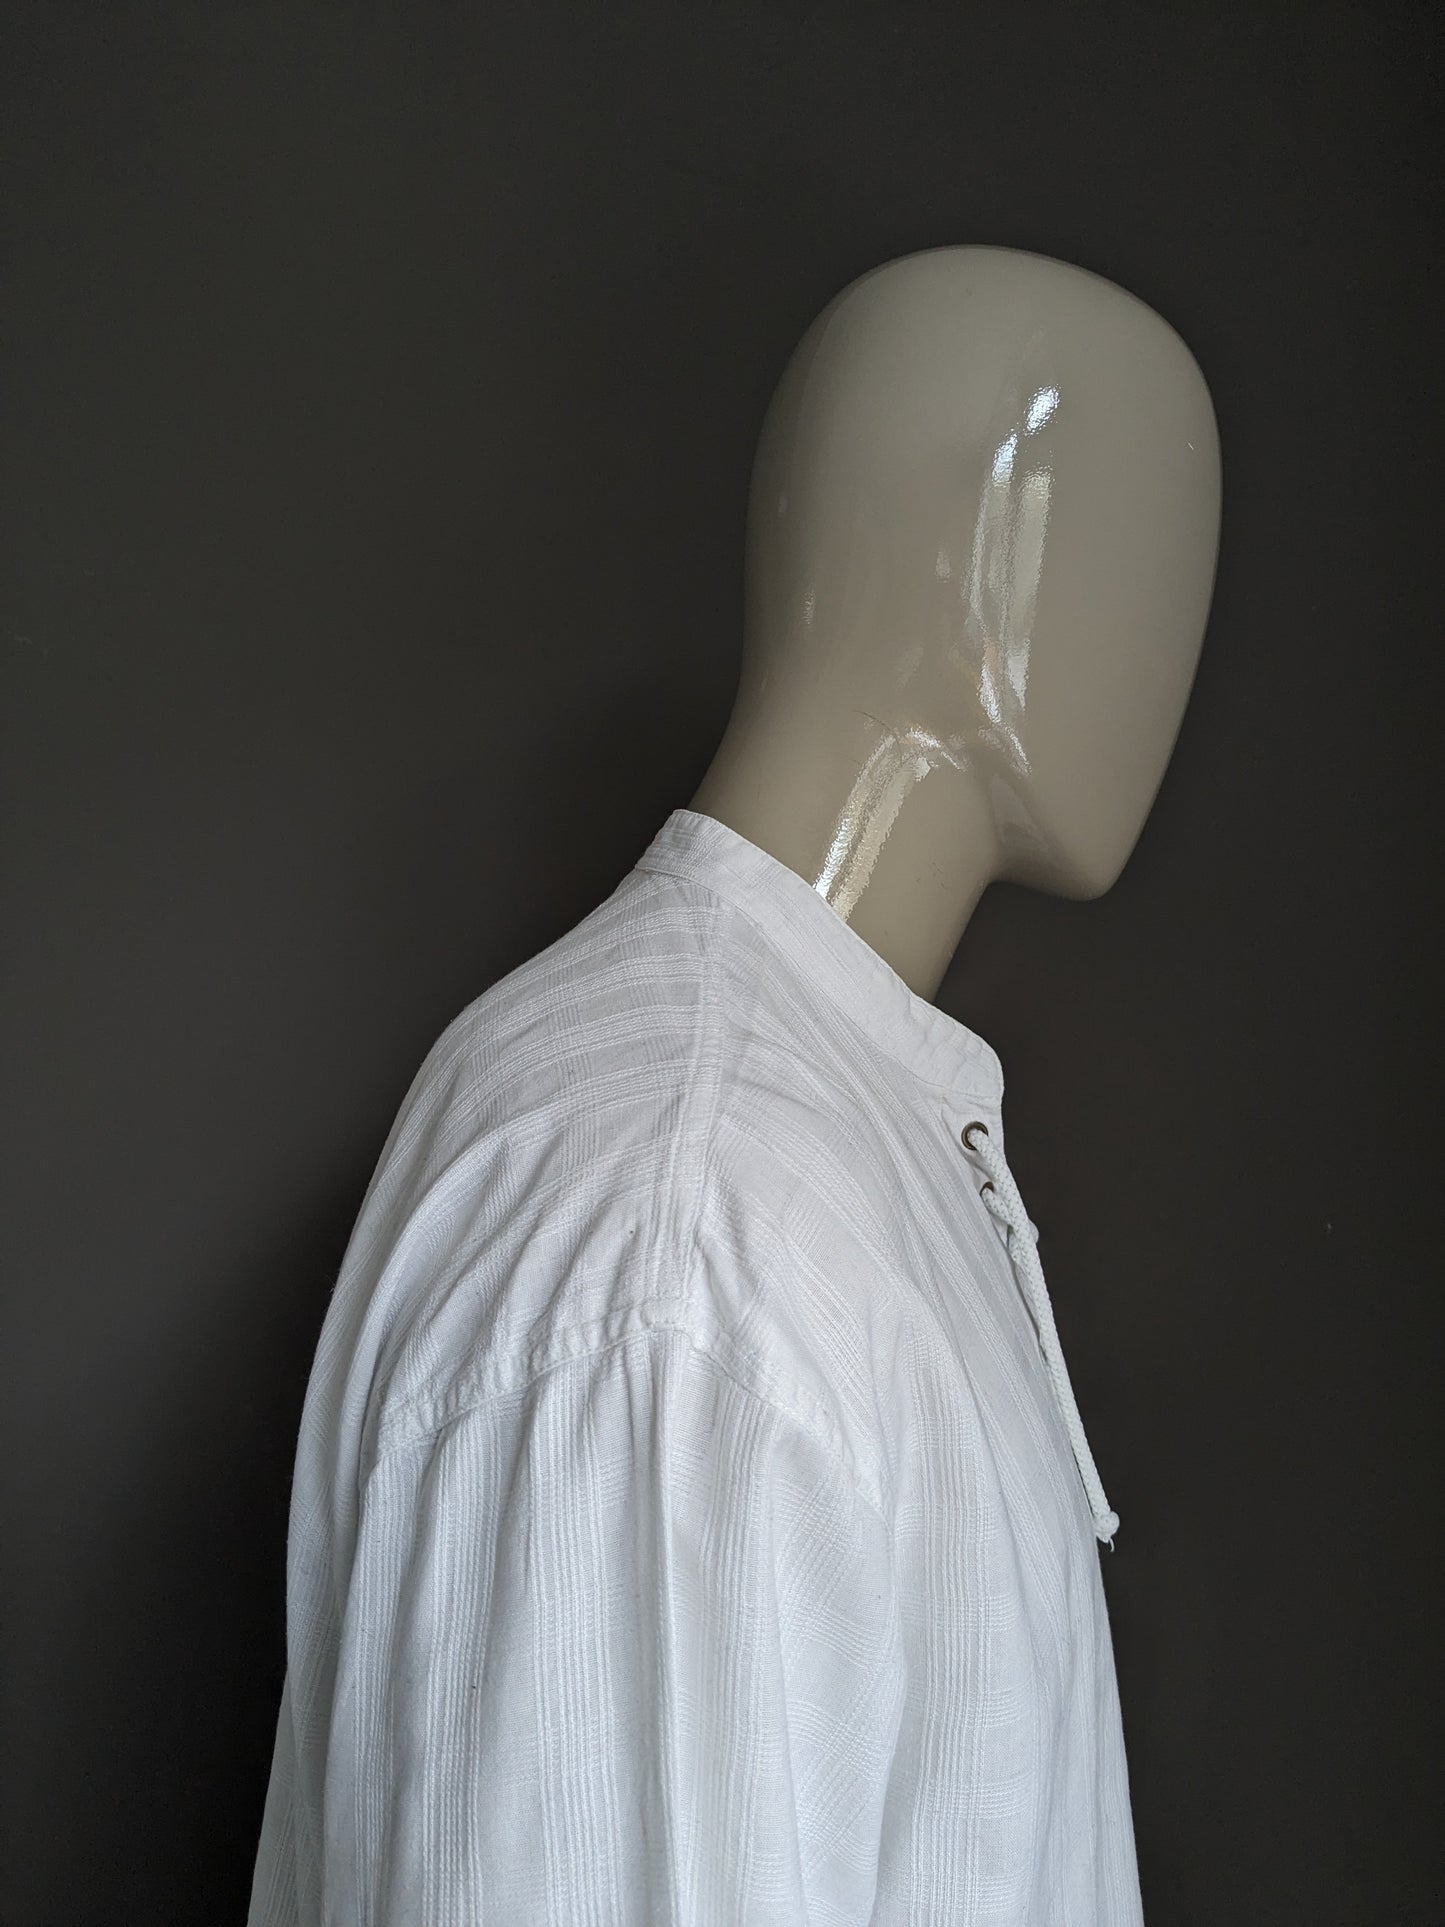 Vintage Gaucho Company shirt with veterans application and Mao / Farmers / Standing Collar. White motif. Size L / XL.